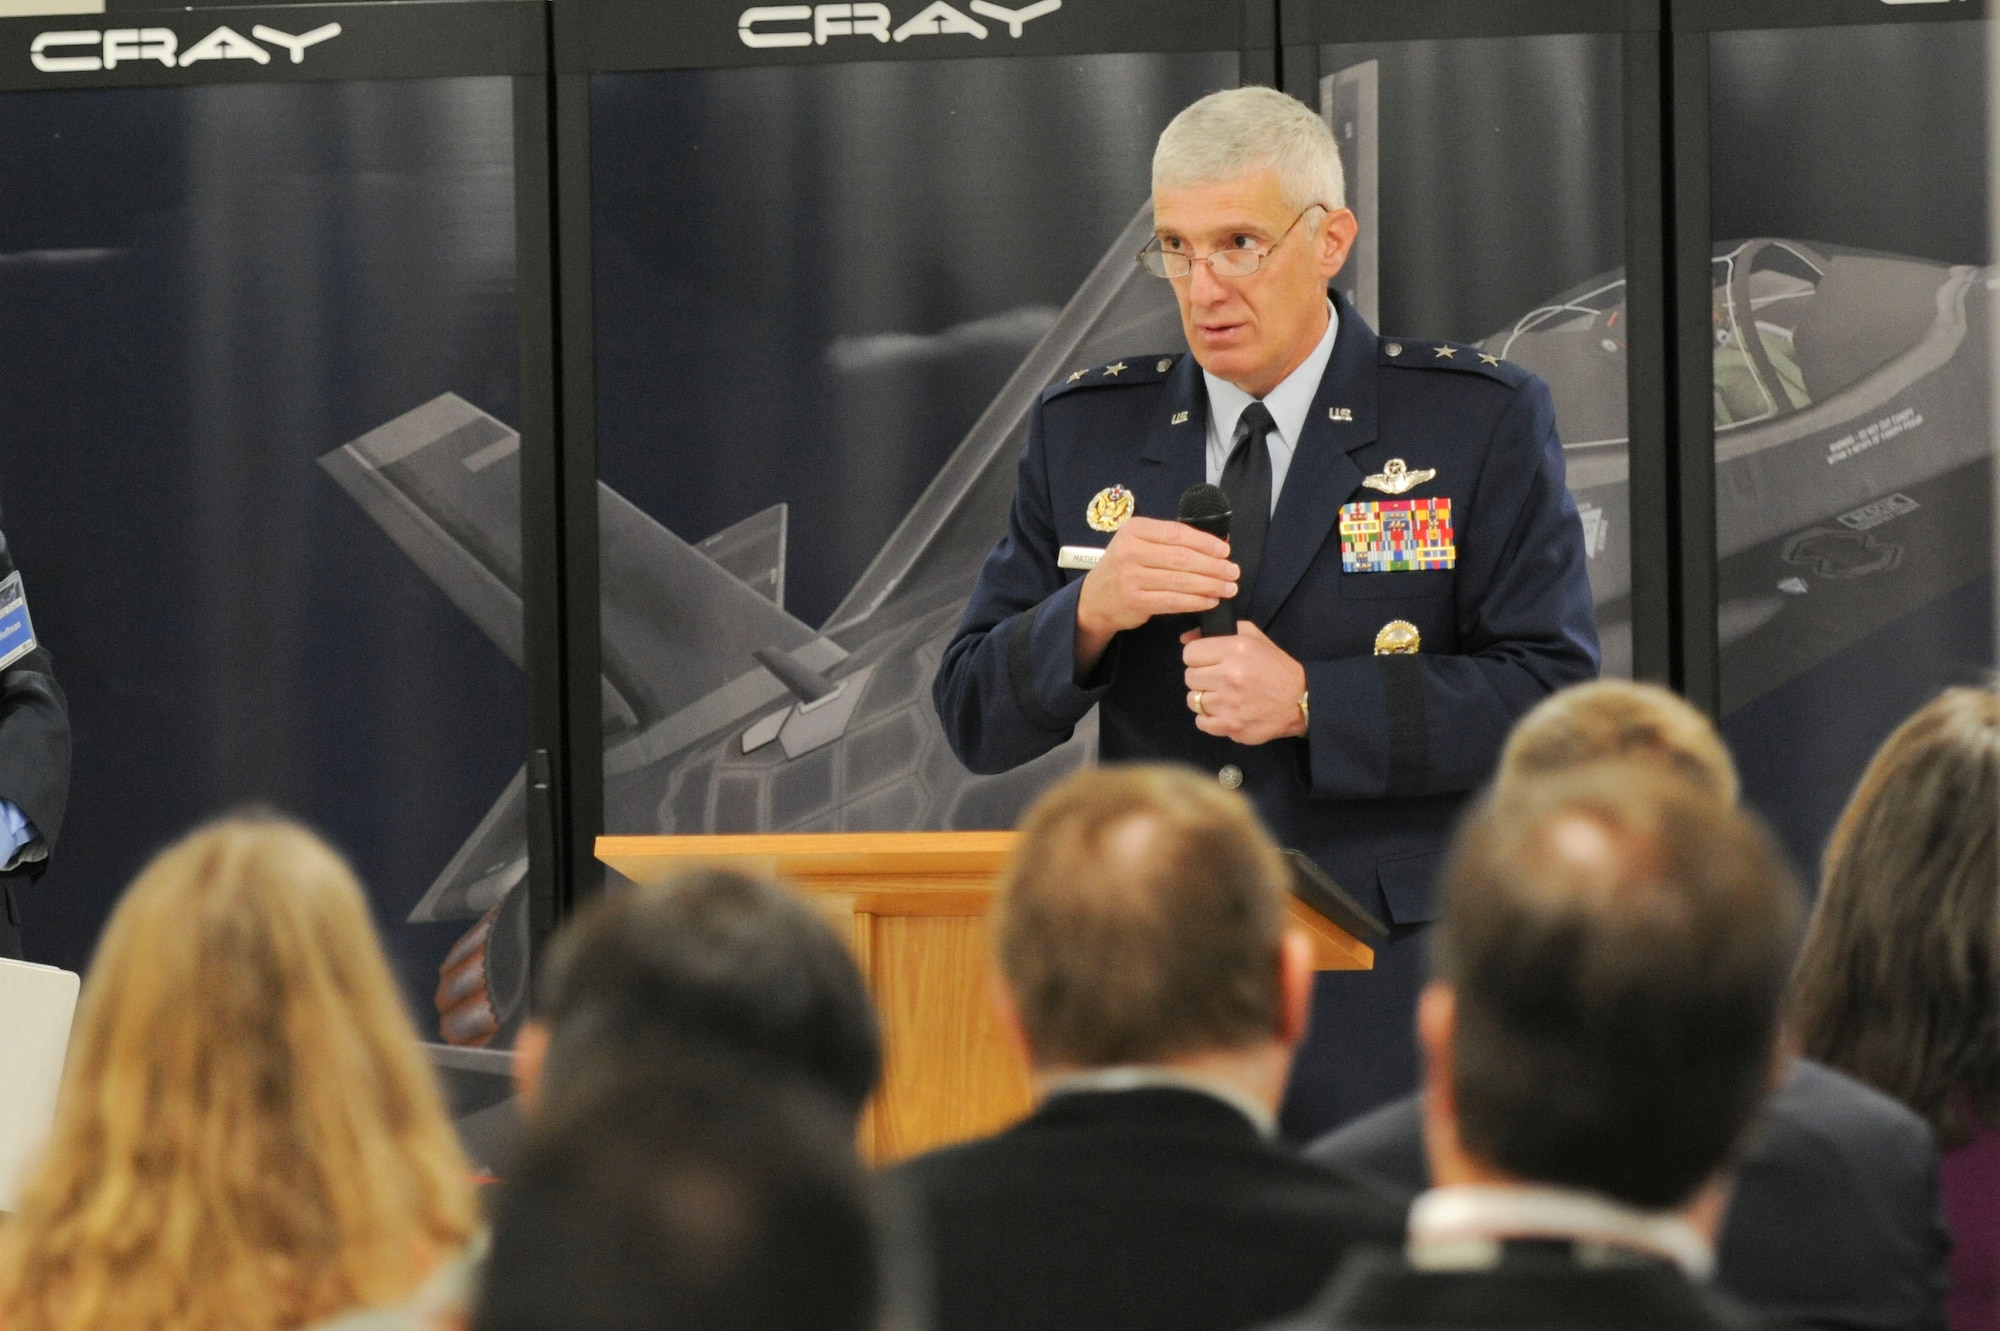 AFRL commander Maj. Gen. Thomas Masiello discusses the major impact that the Lightning supercomputer will have on AFRL and DoD research and testing, during the September 23 ribbon cutting ceremony. (U.S. Air Force photo by Wesley Farnsworth)